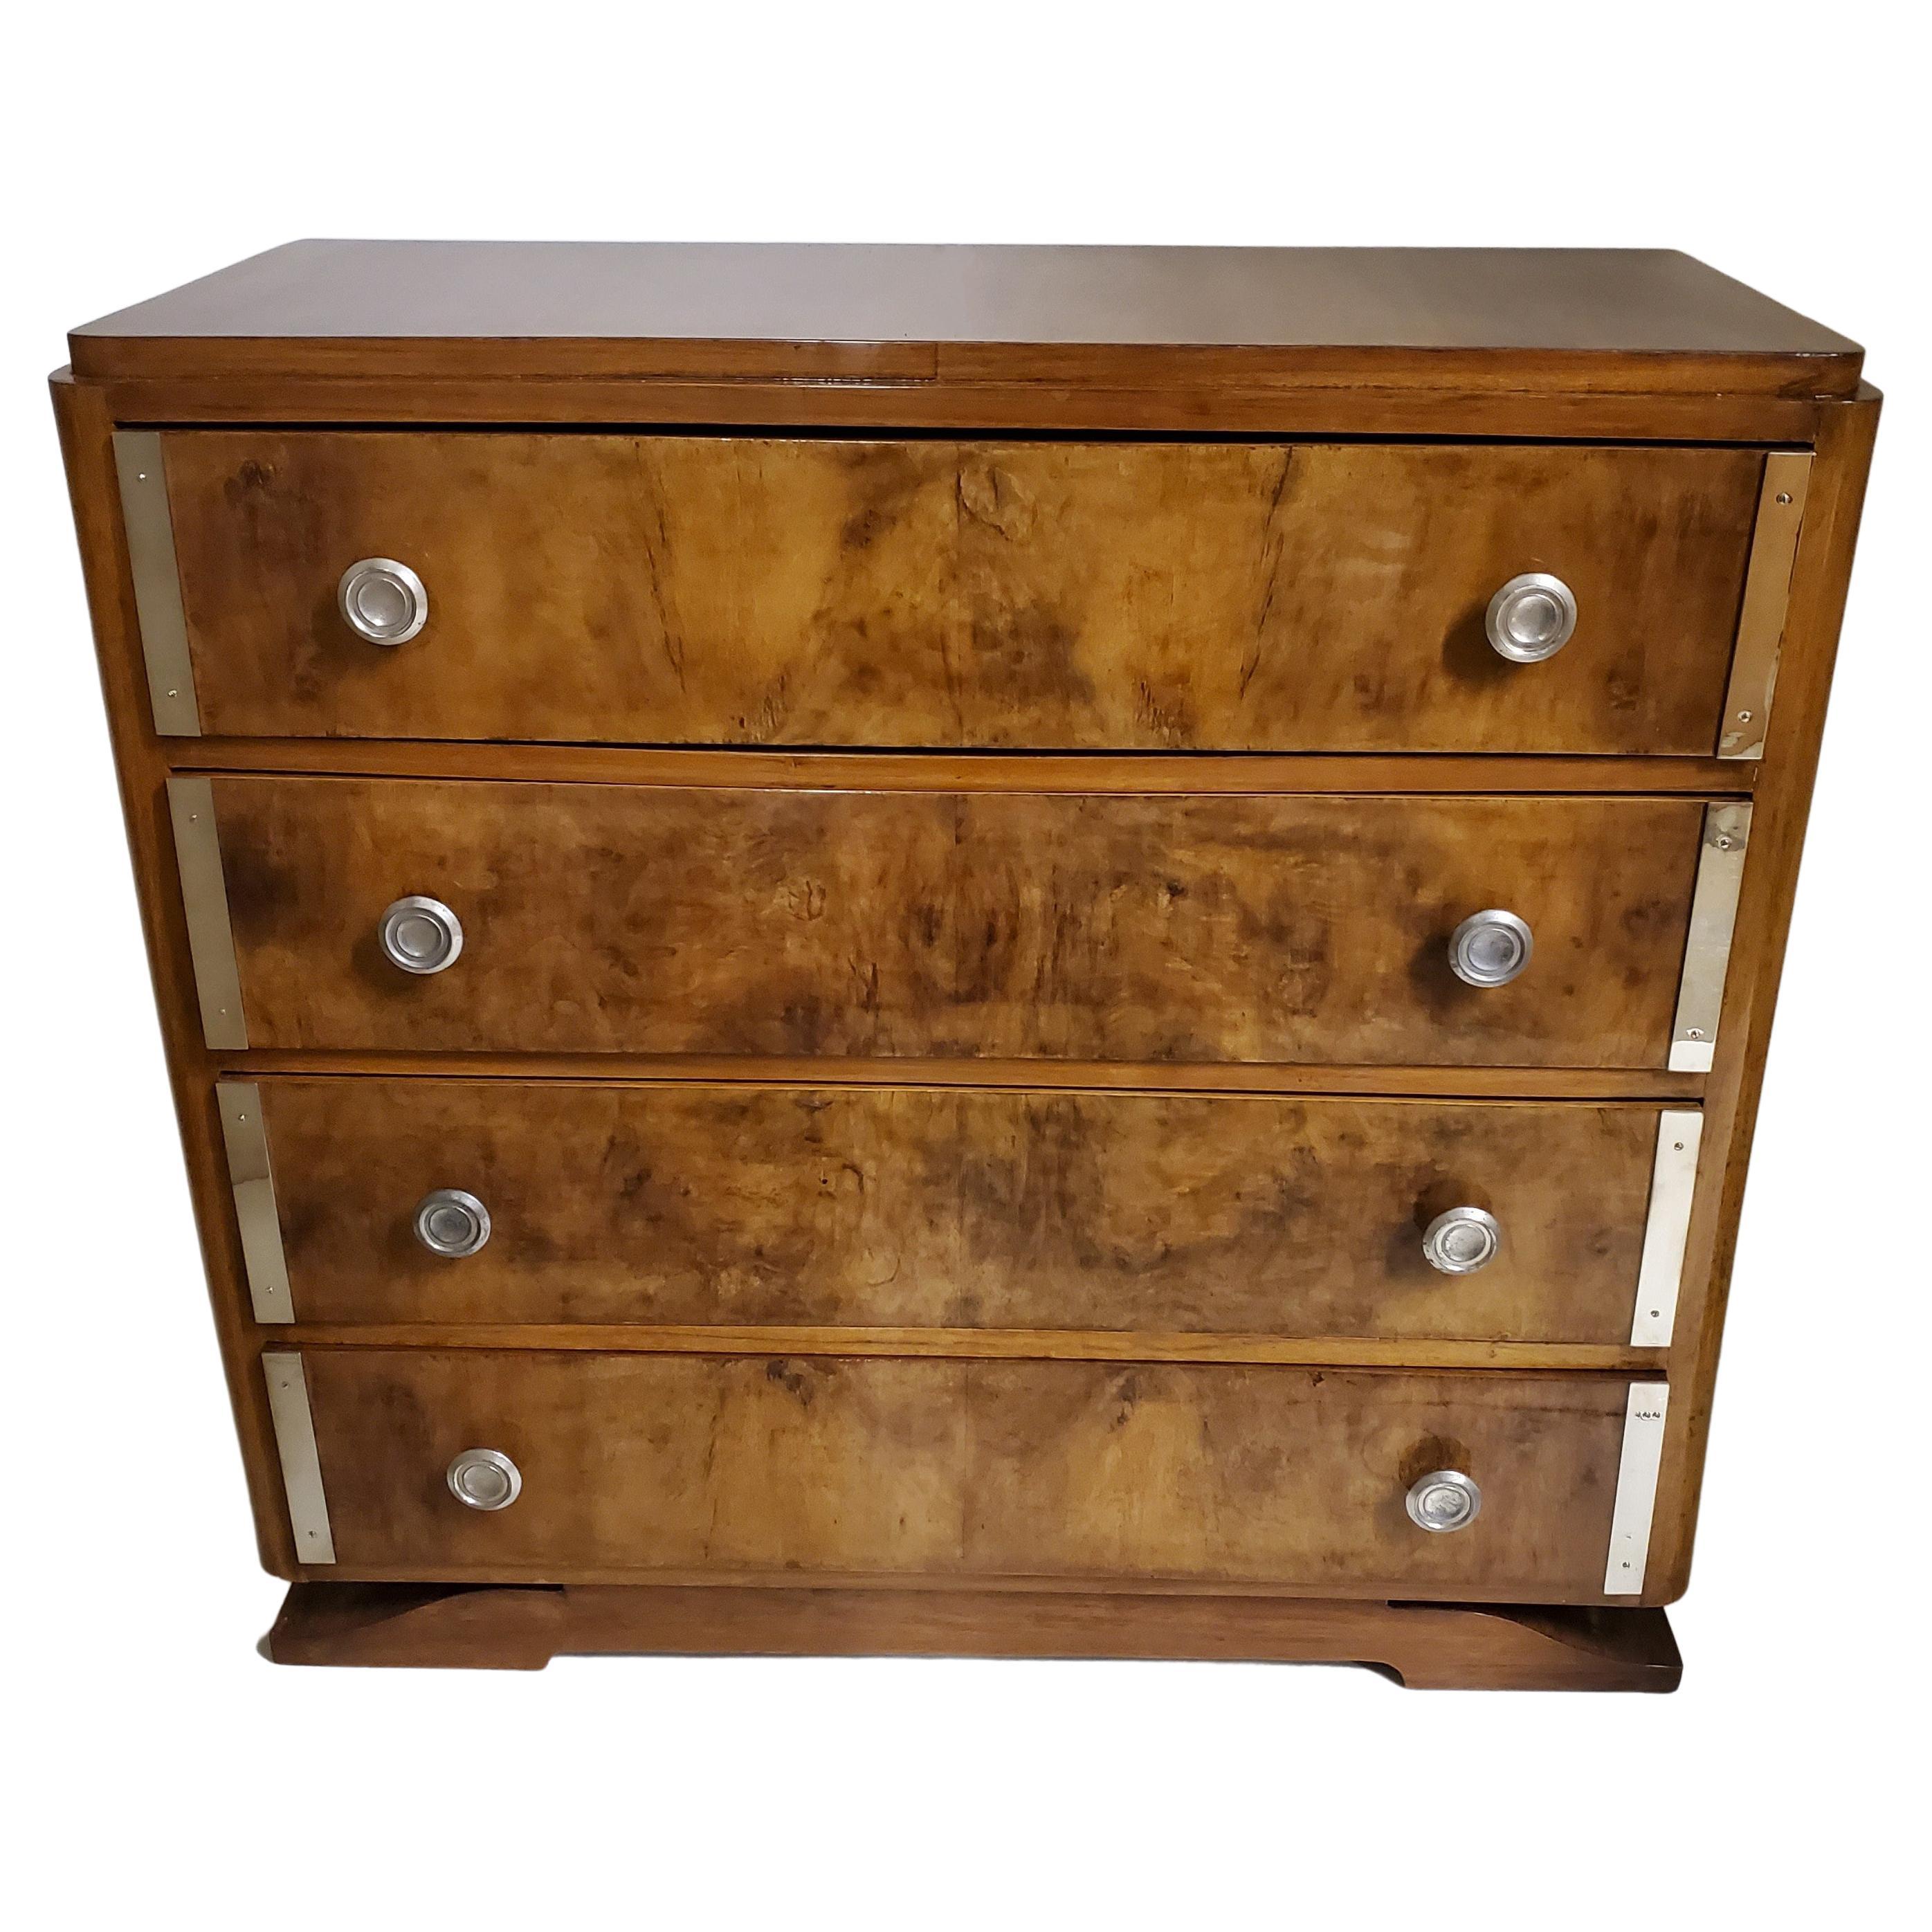 A luxurious, vintage four drawer French Art Deco dresser, chest of drawers in burl walnut featuring a lively grain pattern with a rich, warm appearance. The burl wood provides a unique and eye-catching texture that is both sumptuous and rustic at